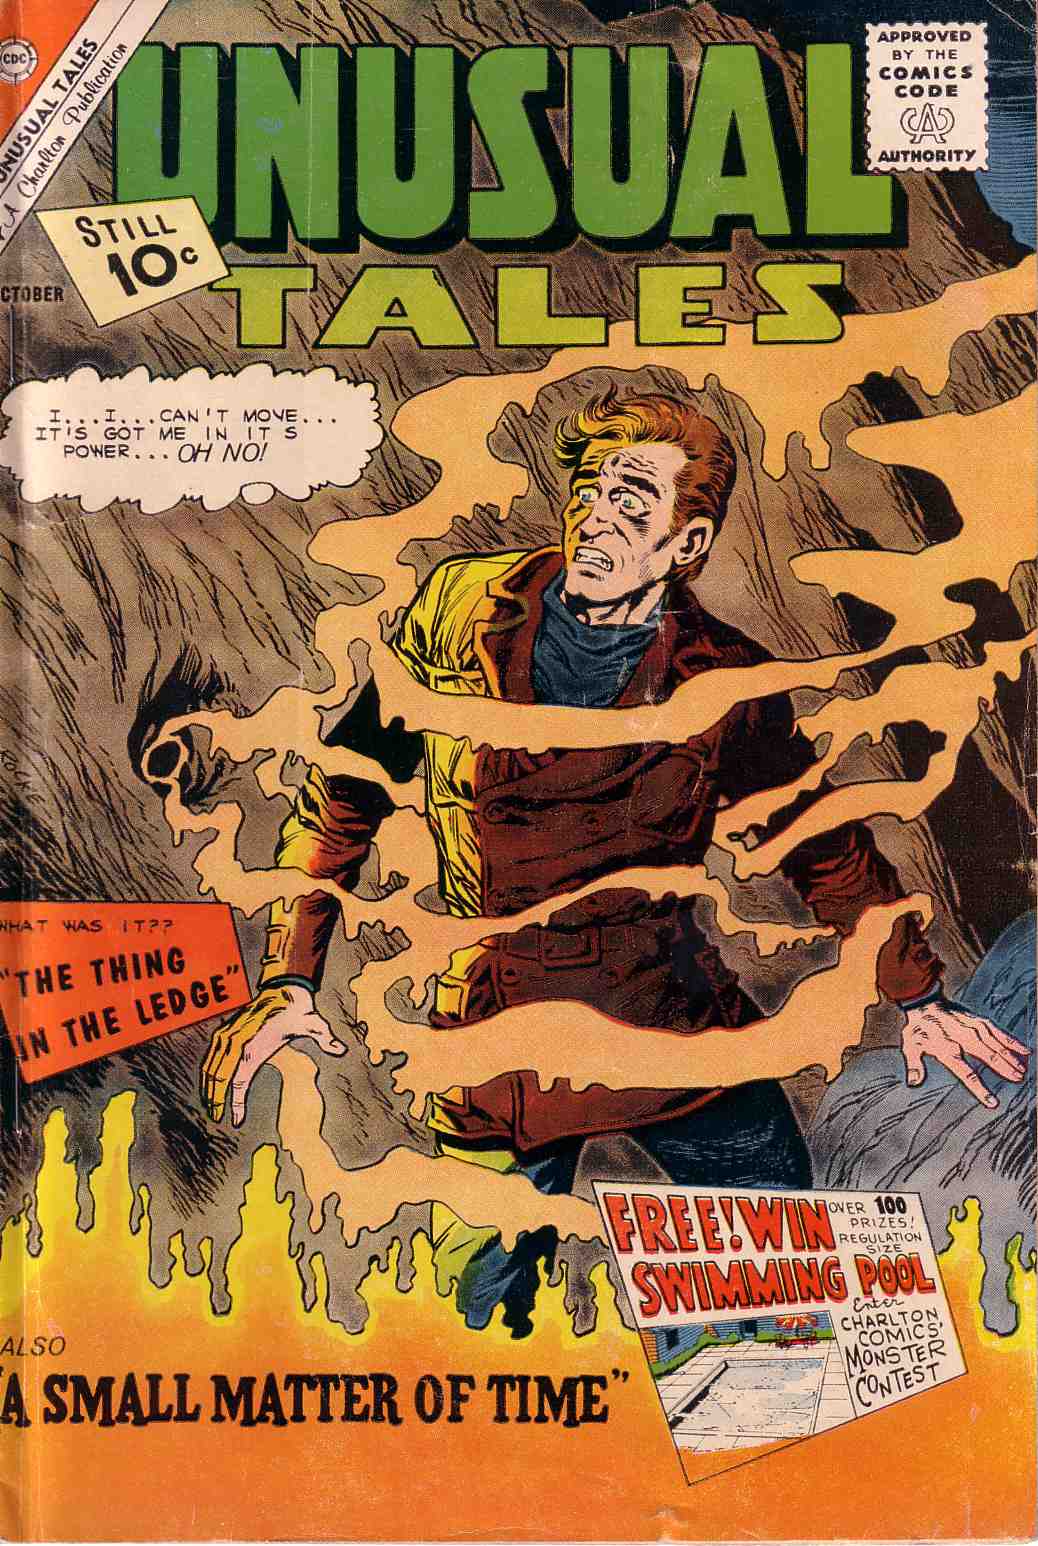 Read online Unusual Tales comic -  Issue #30 - 1